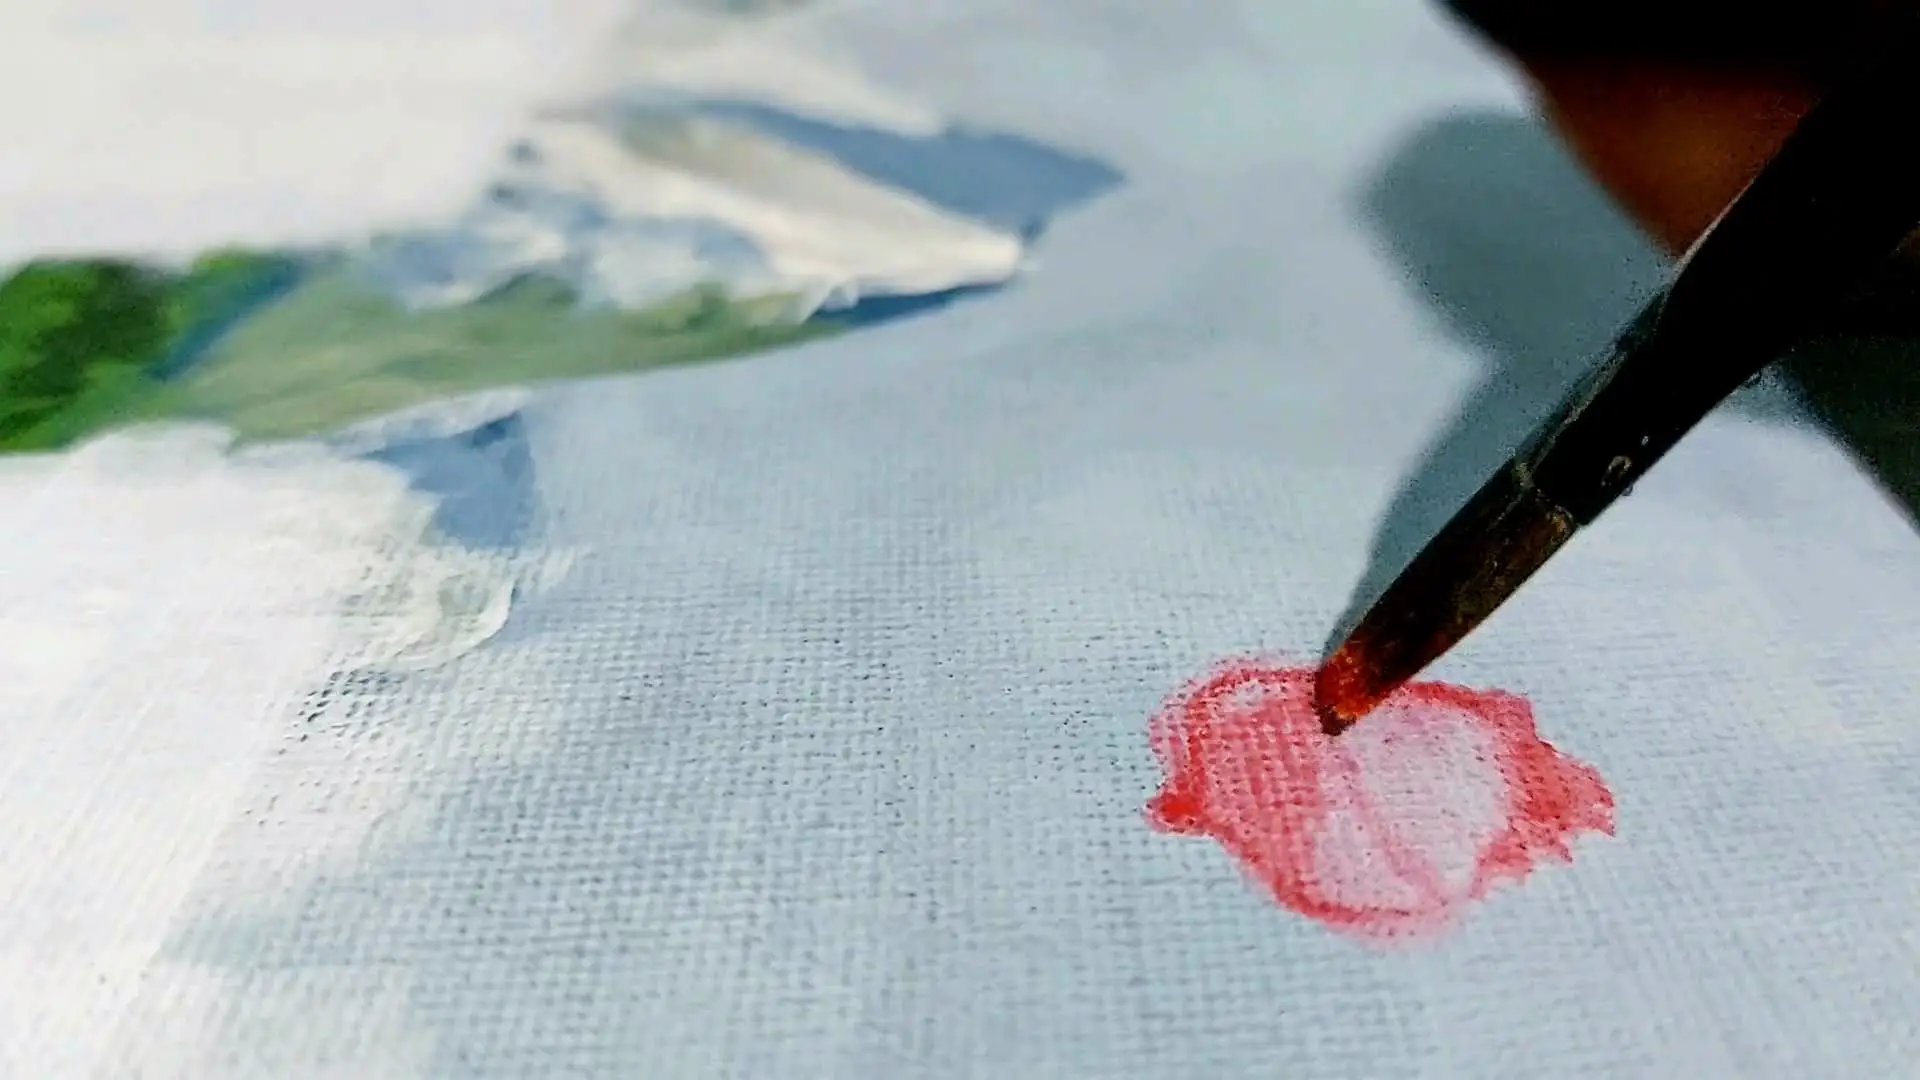 Fixing a messed-up acrylic painting: what you need to know